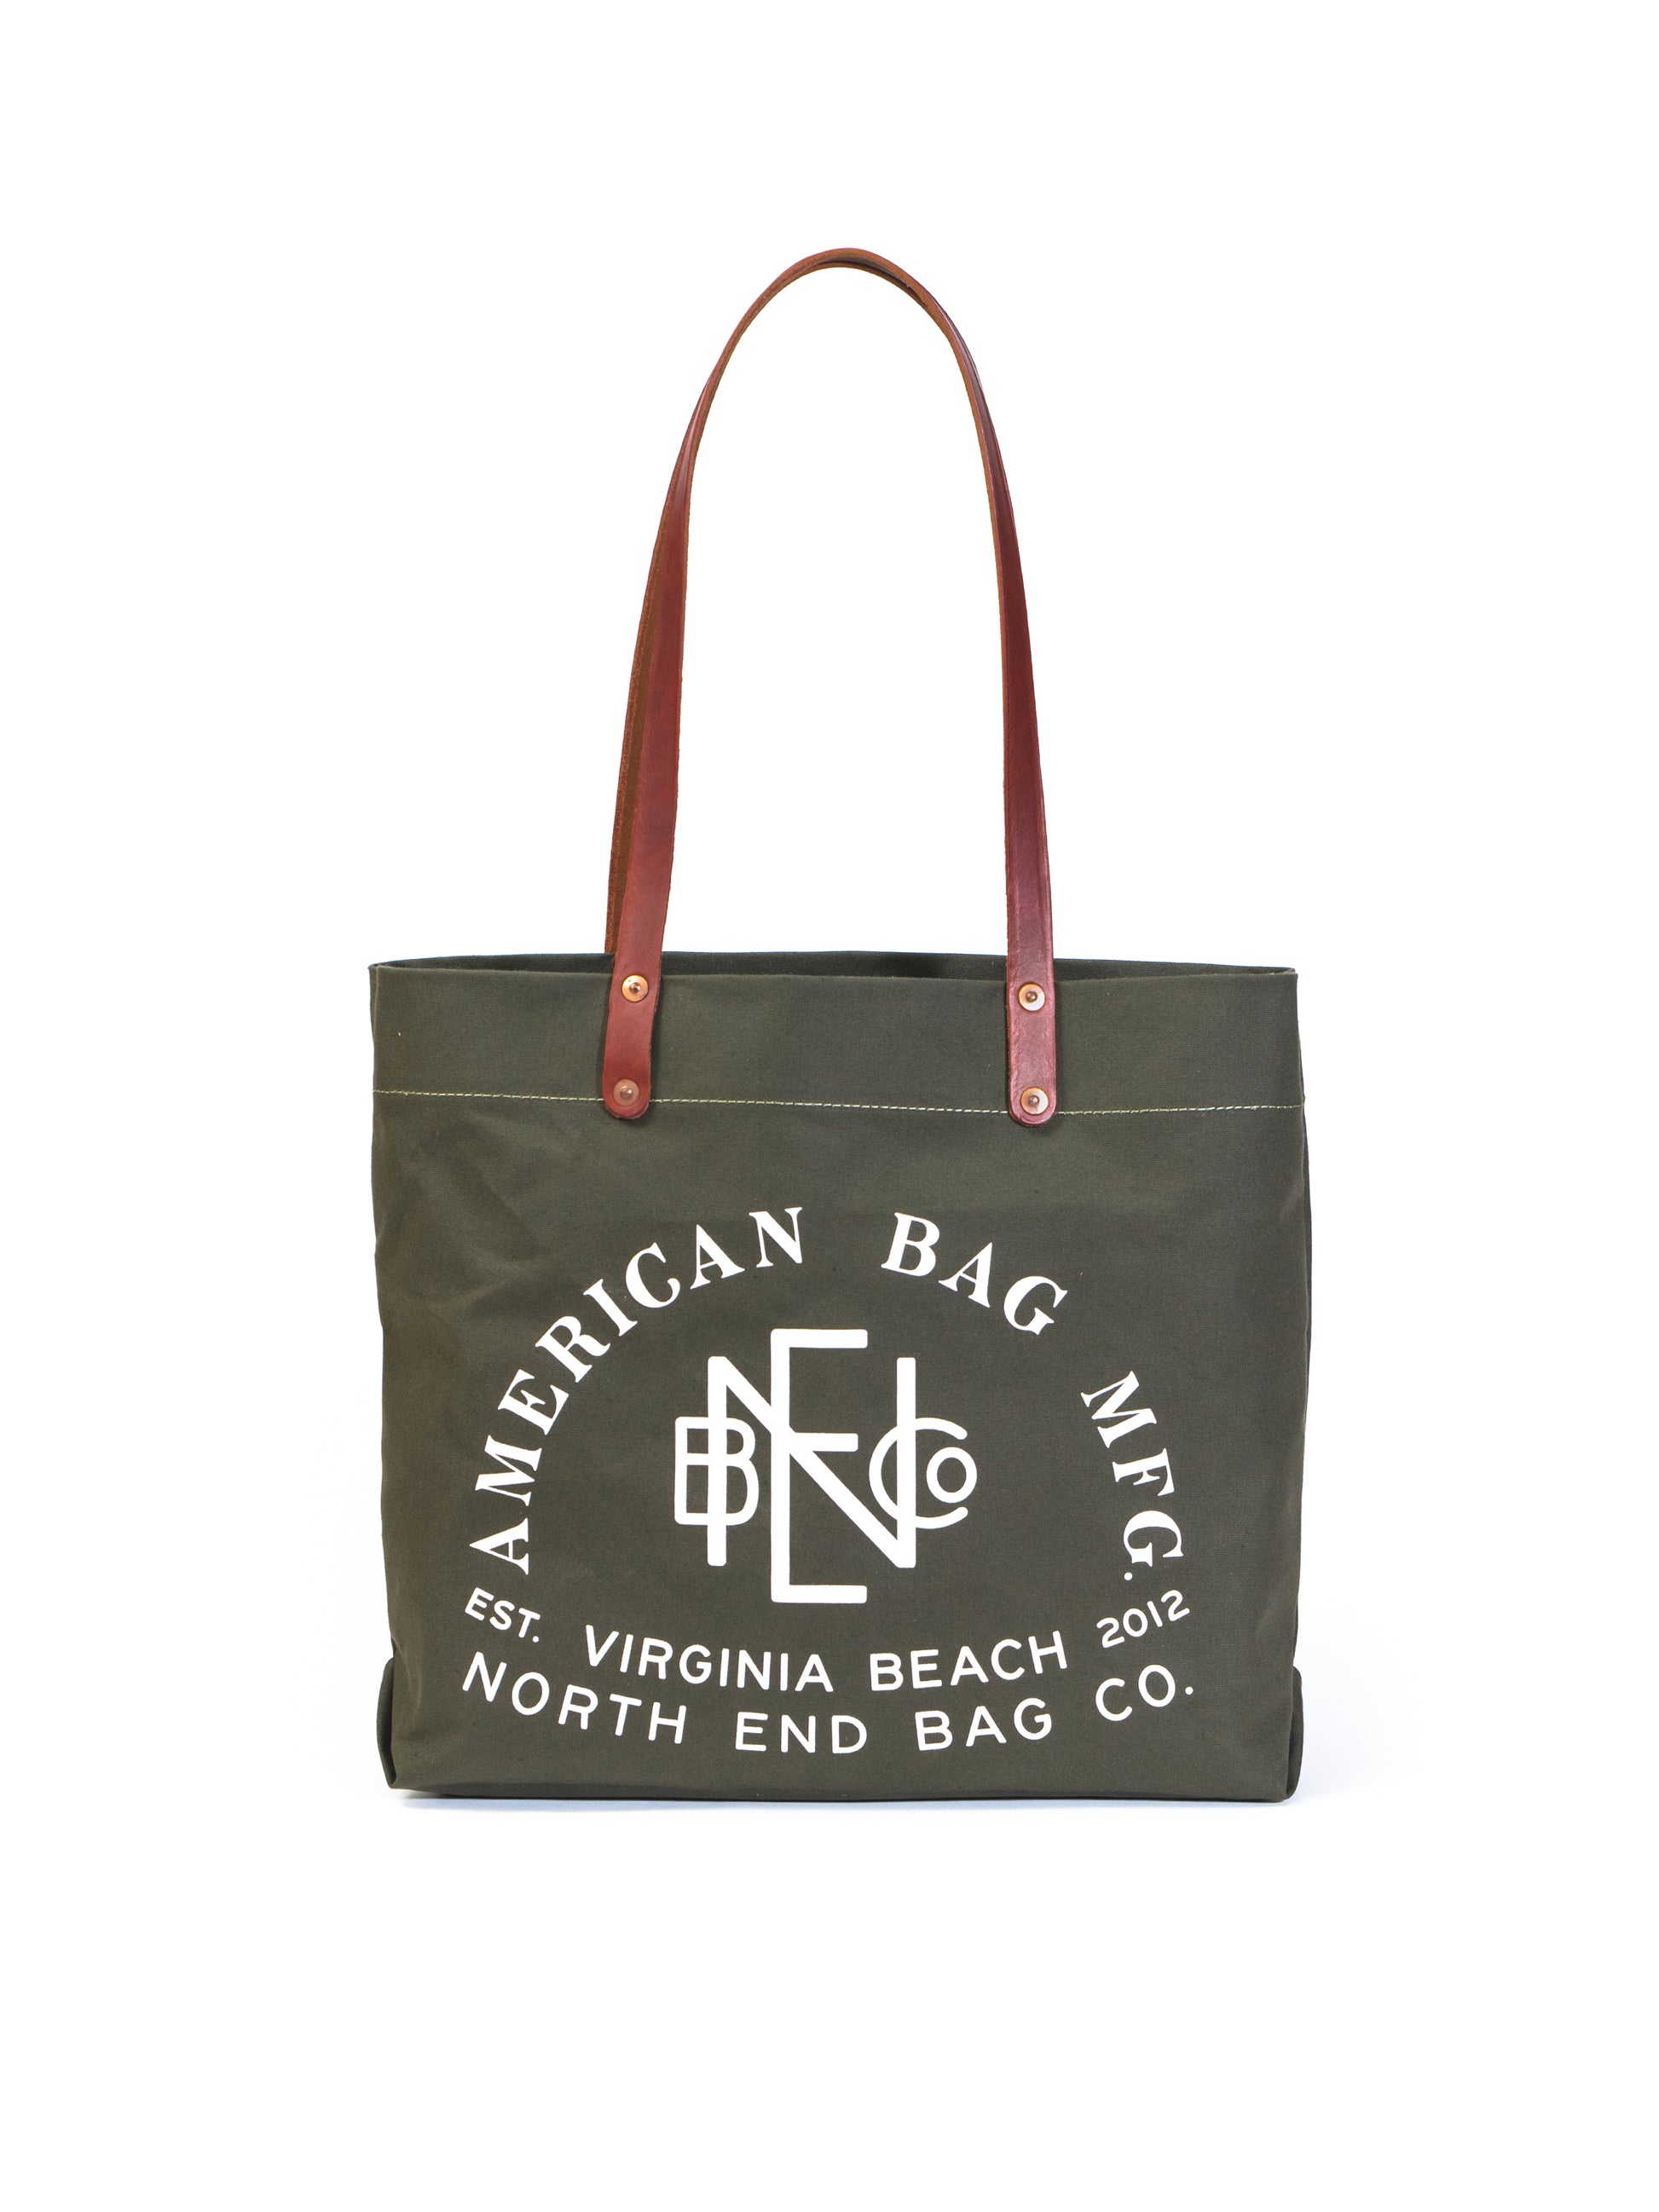 Handmade Canvas & Leather Bags and Aprons - North End Bag Company